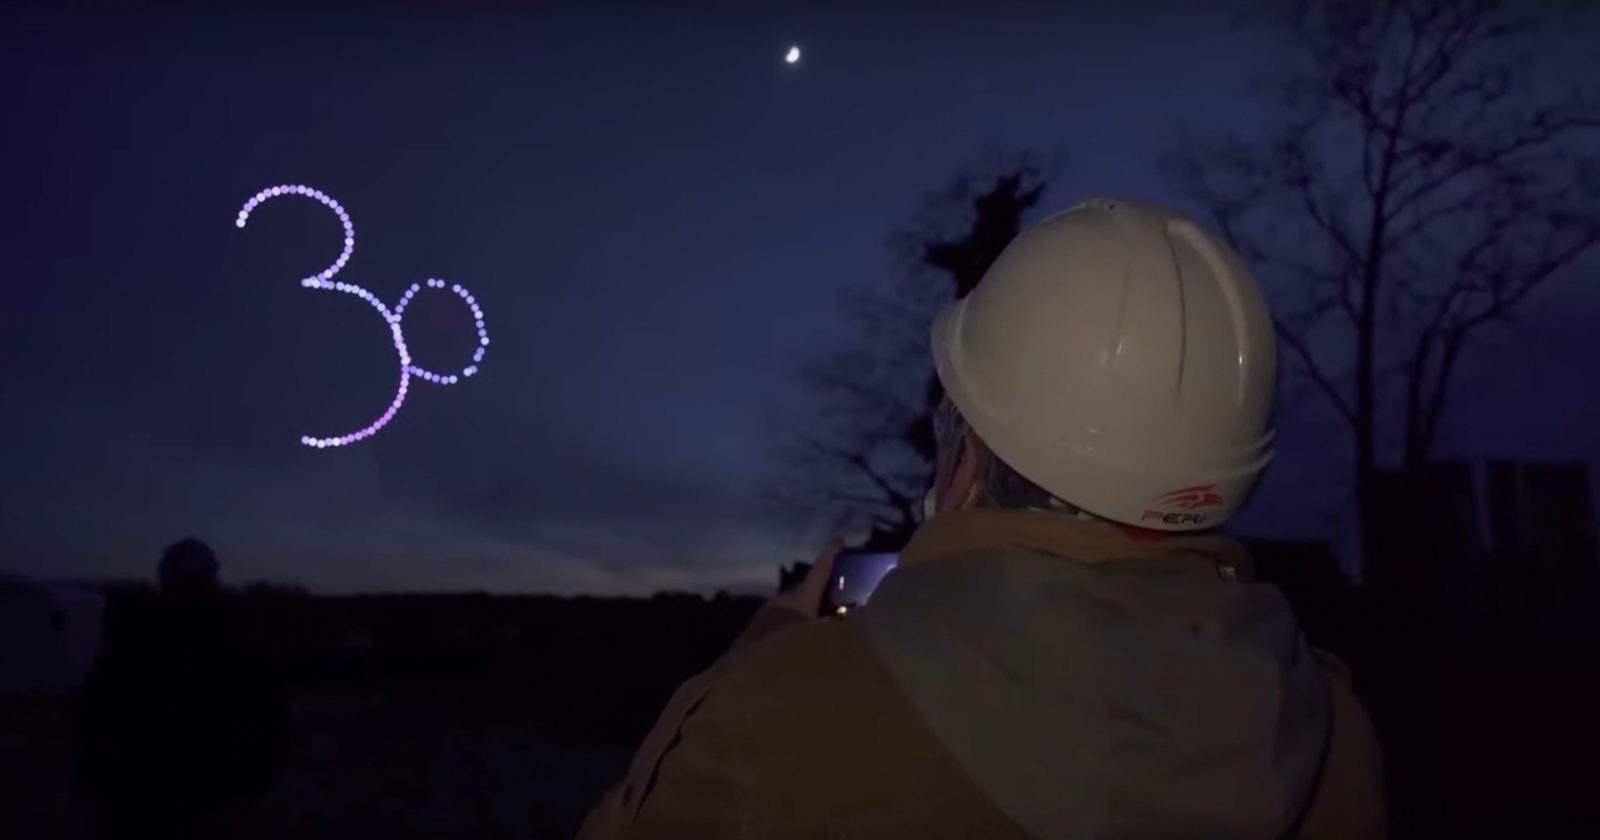 Disneyland Paris goes all in on drones with multiple light shows